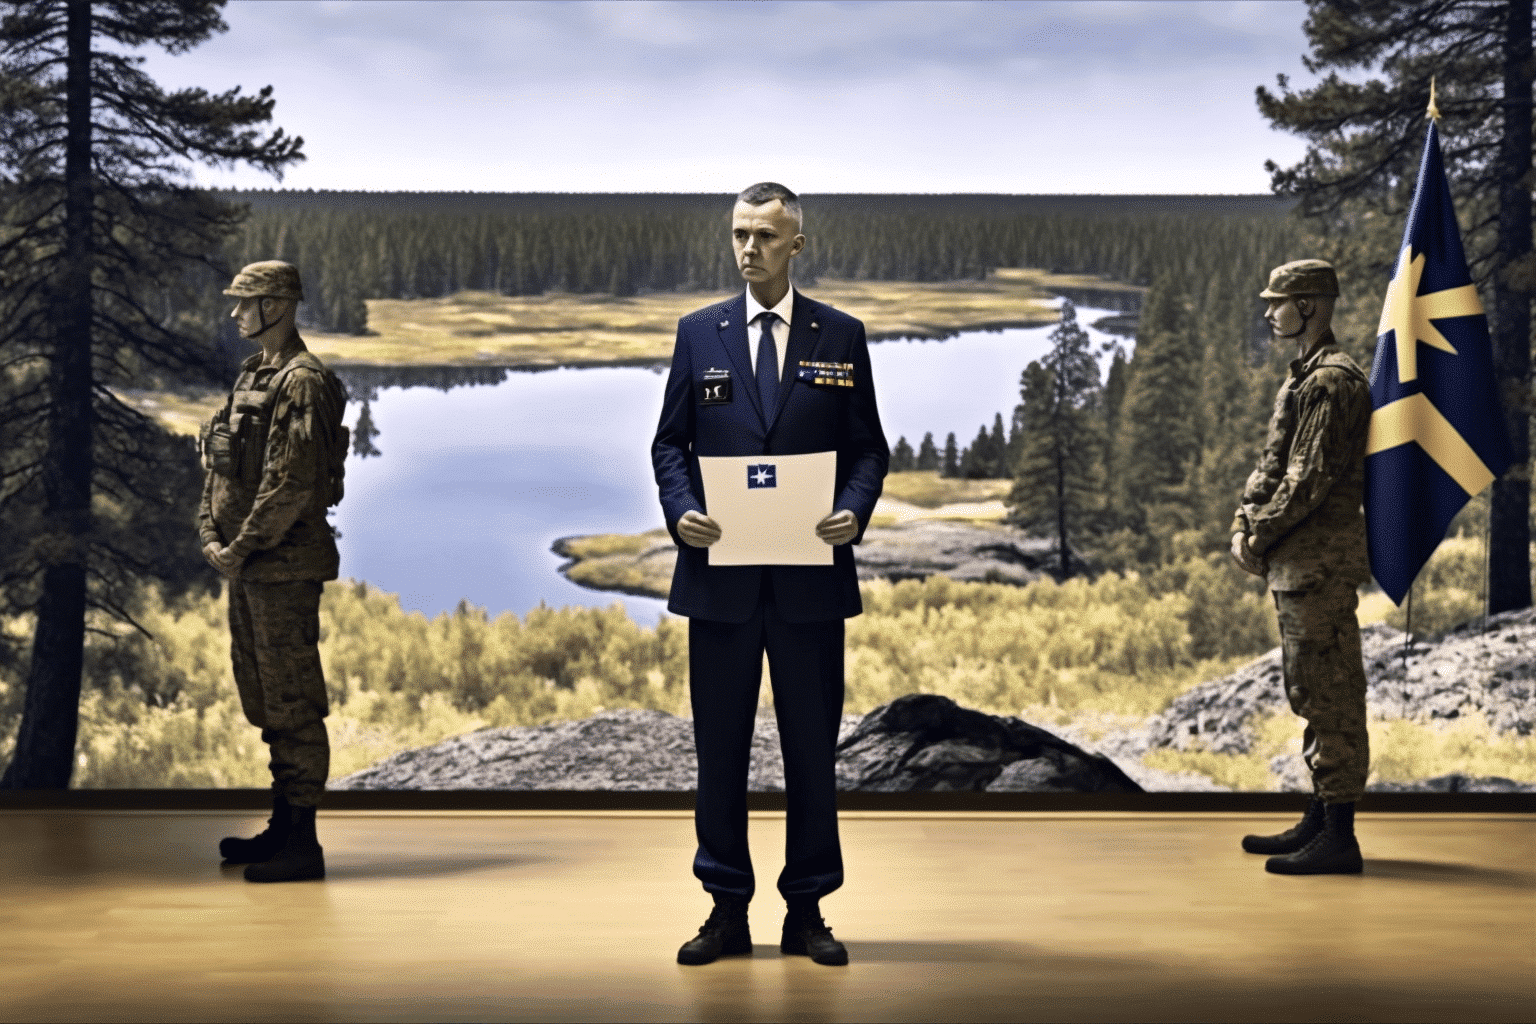 finland-overcomes-last-obstacle-to-nato-membership,-bringing-putin's-geopolitical-nightmare-closer-to-reality